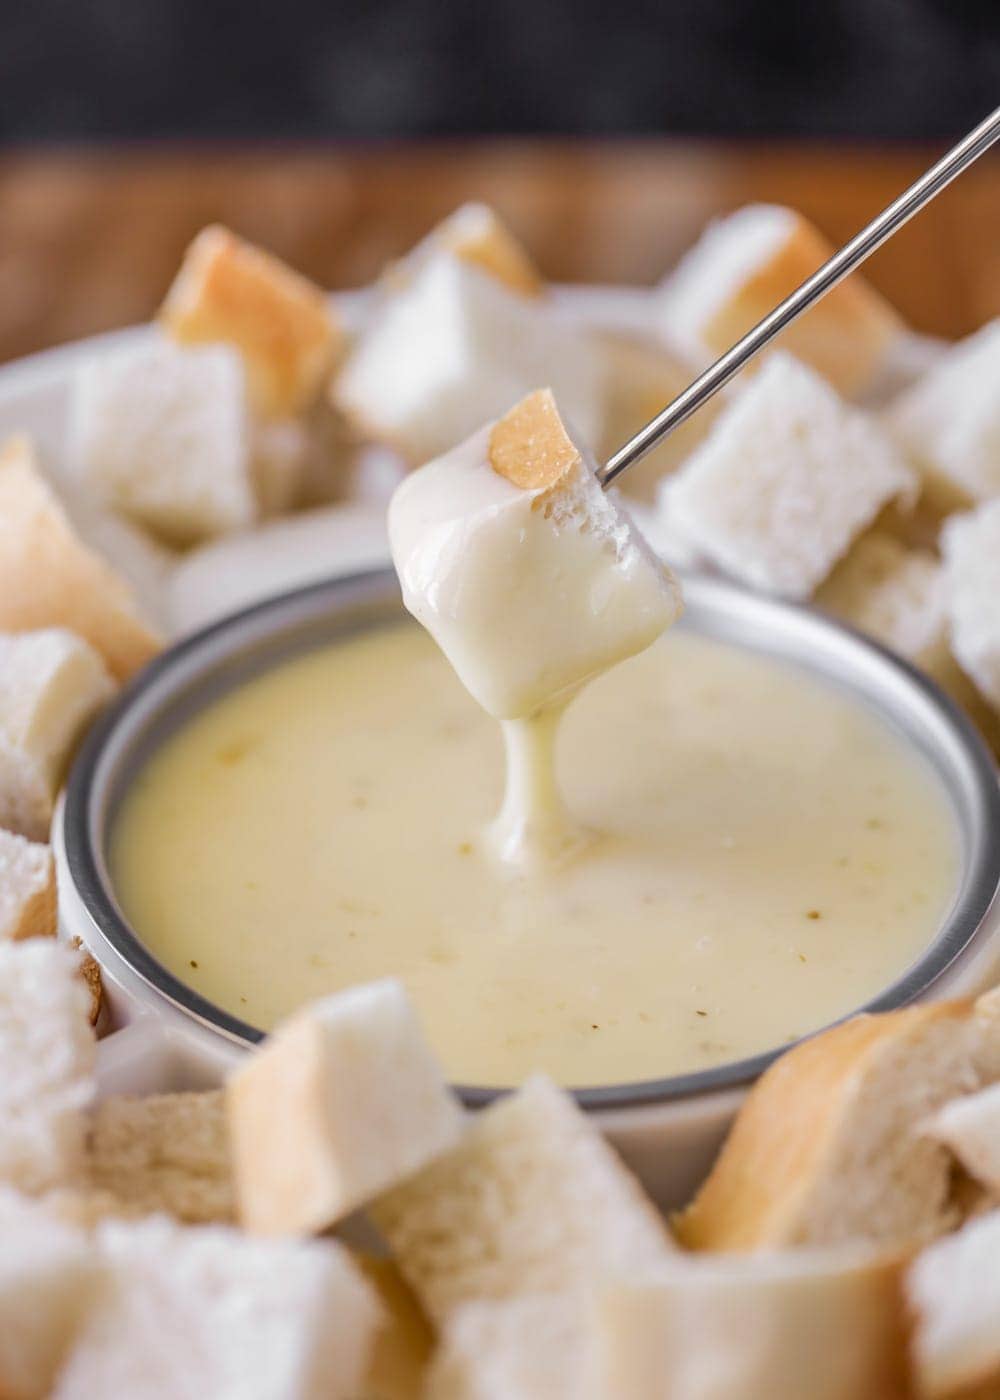 Dipping cubed bread into cheese fondue.